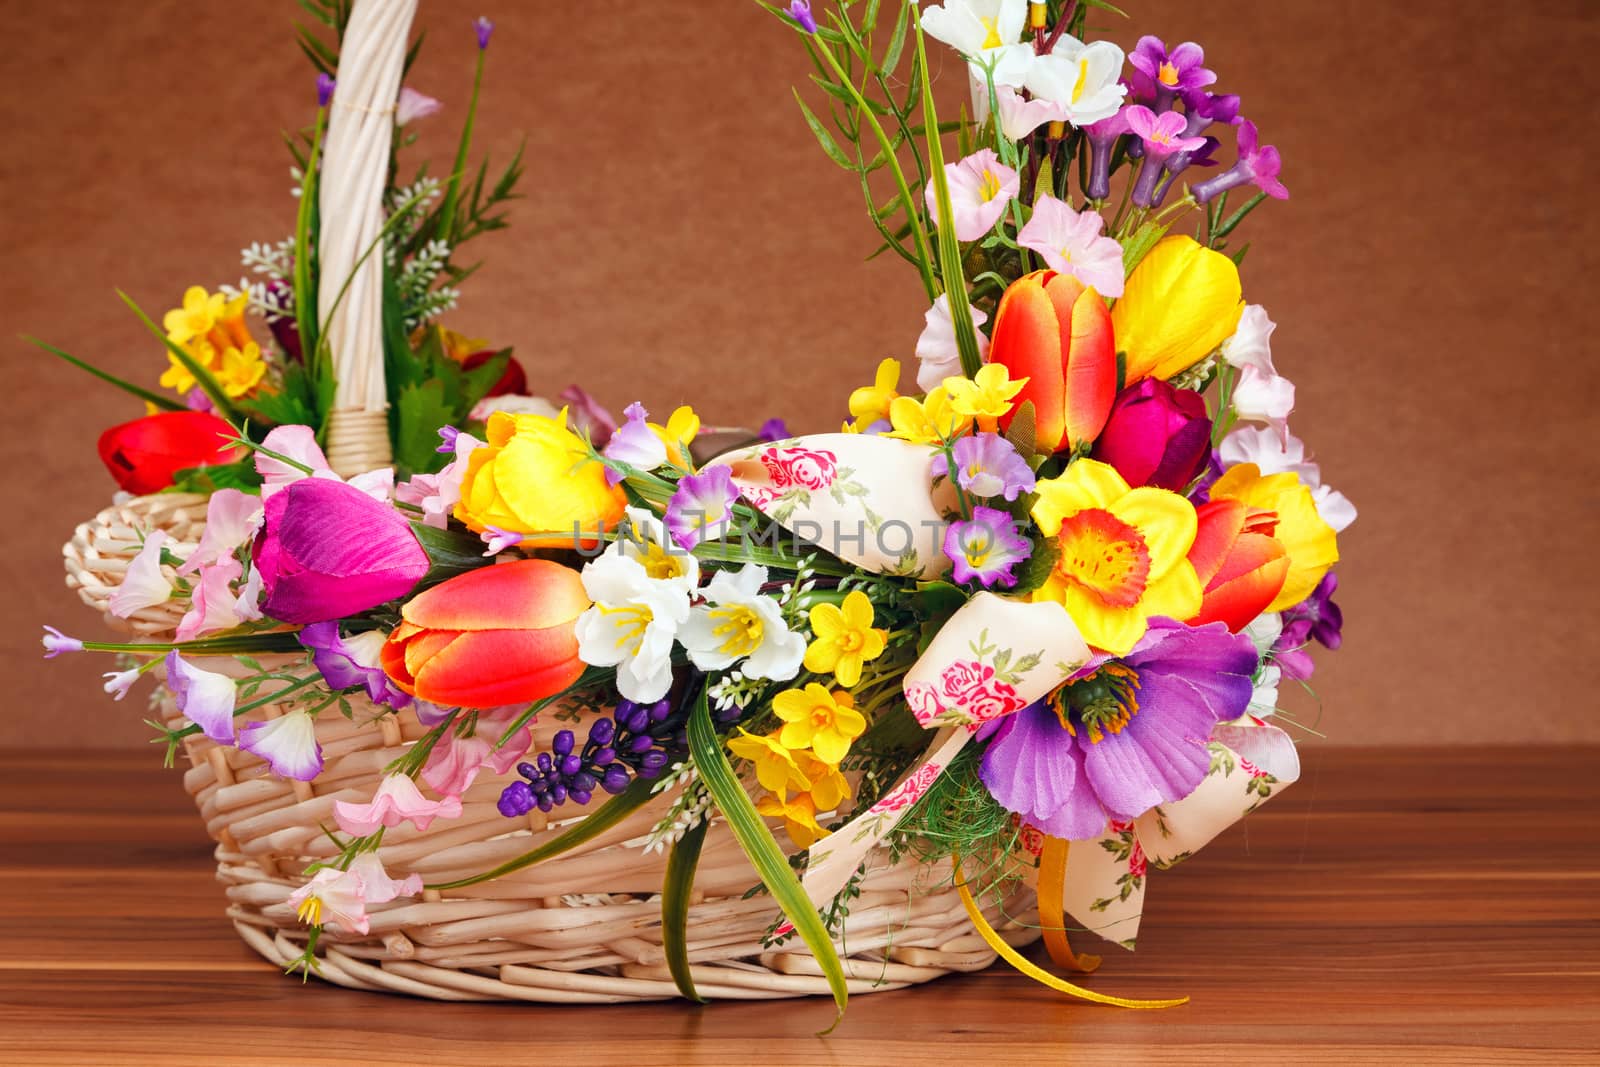 basket decorated with flowers on wooden table